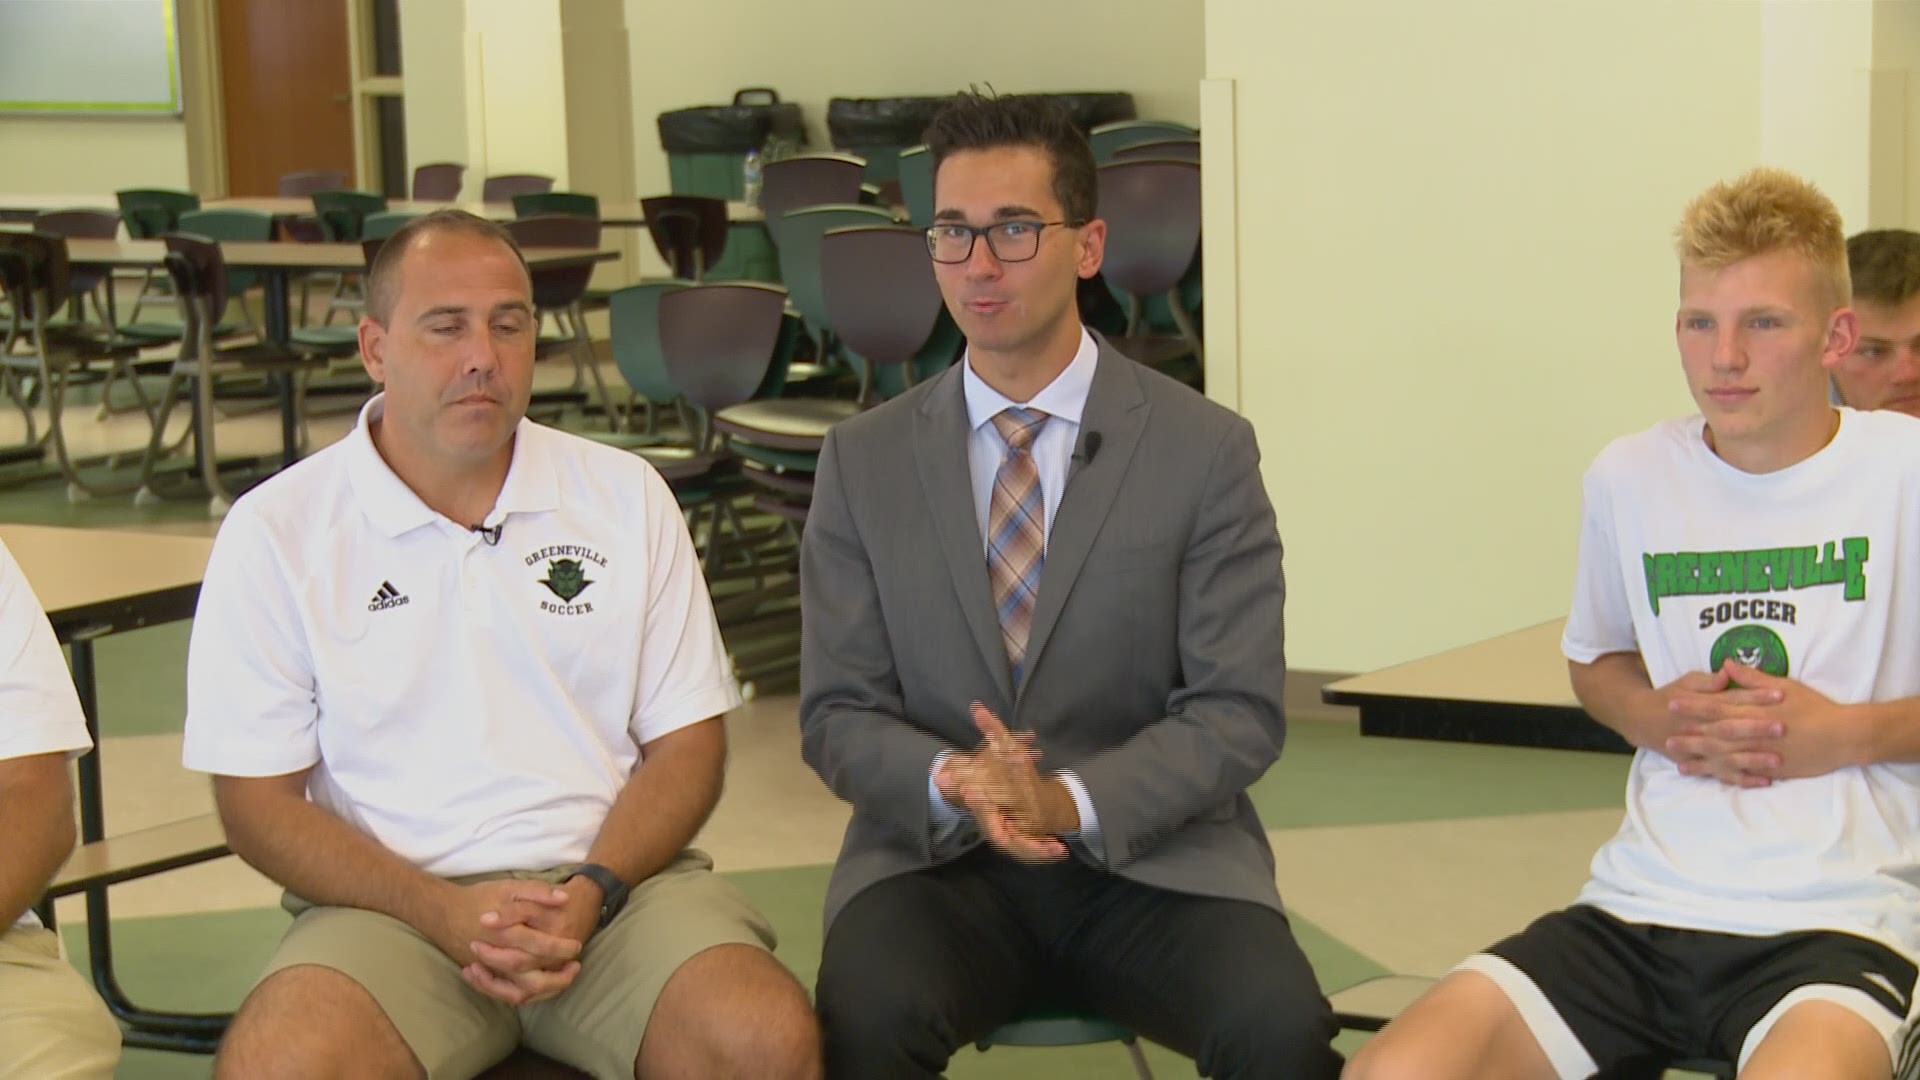 WBIR Sports catches up with Greeneville soccer after the team won its second state title in a row in May.